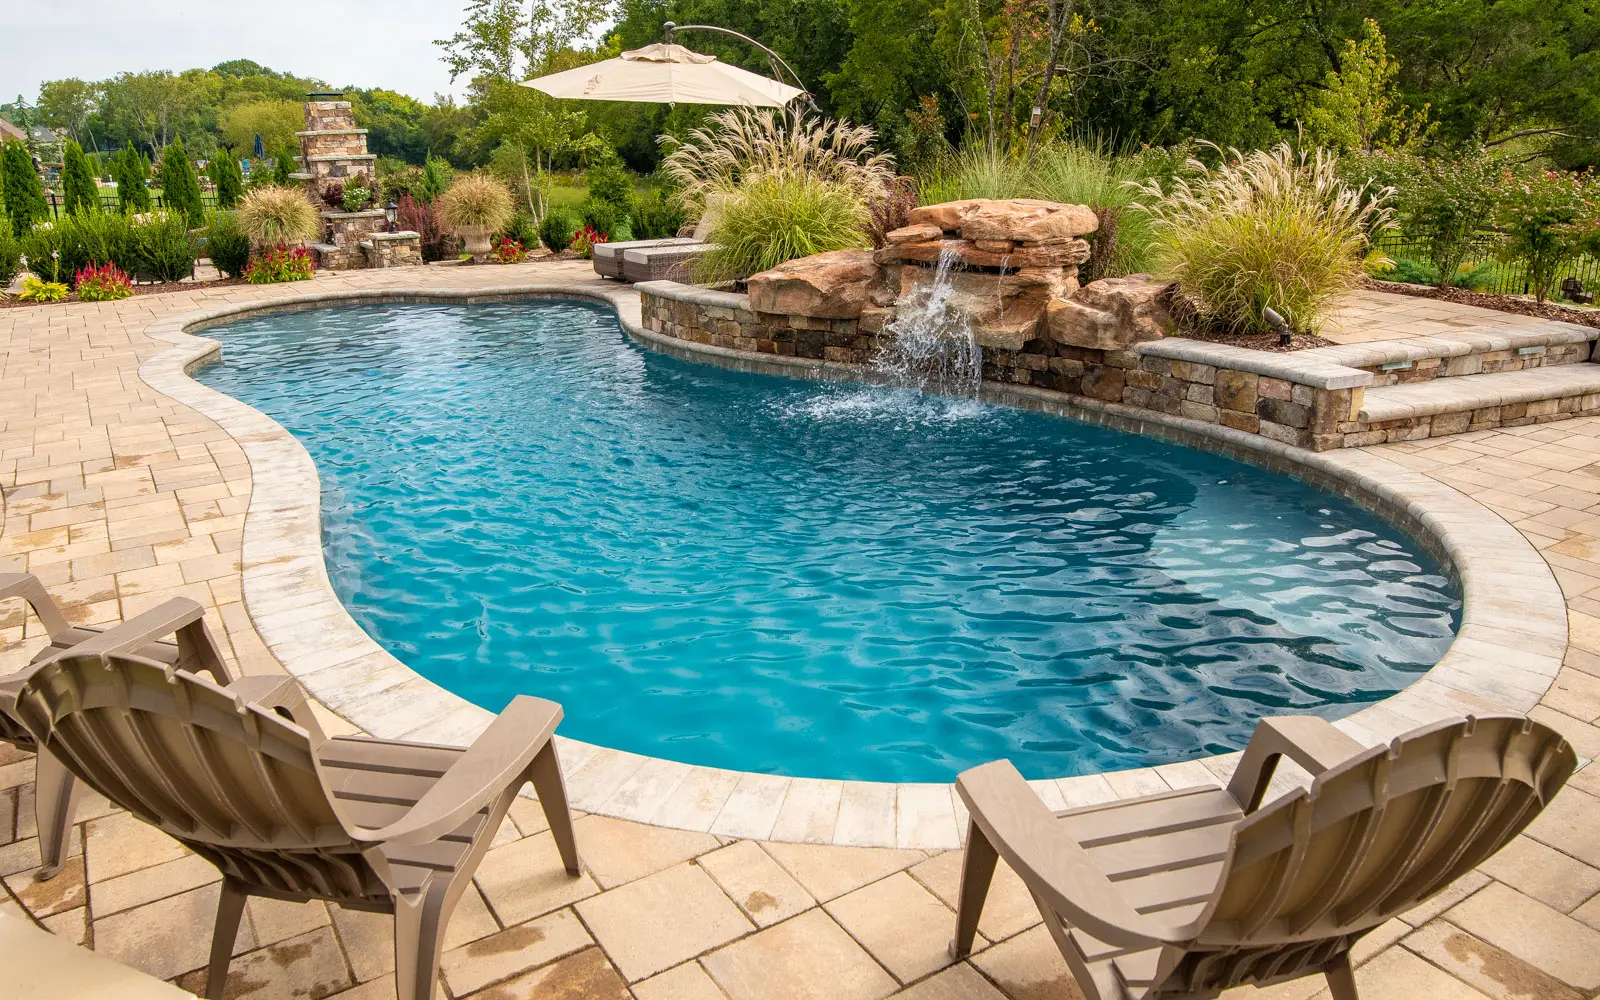 Unmatched pool installations for the Mississippi Gulf Coast from Backyard Paradise Pools